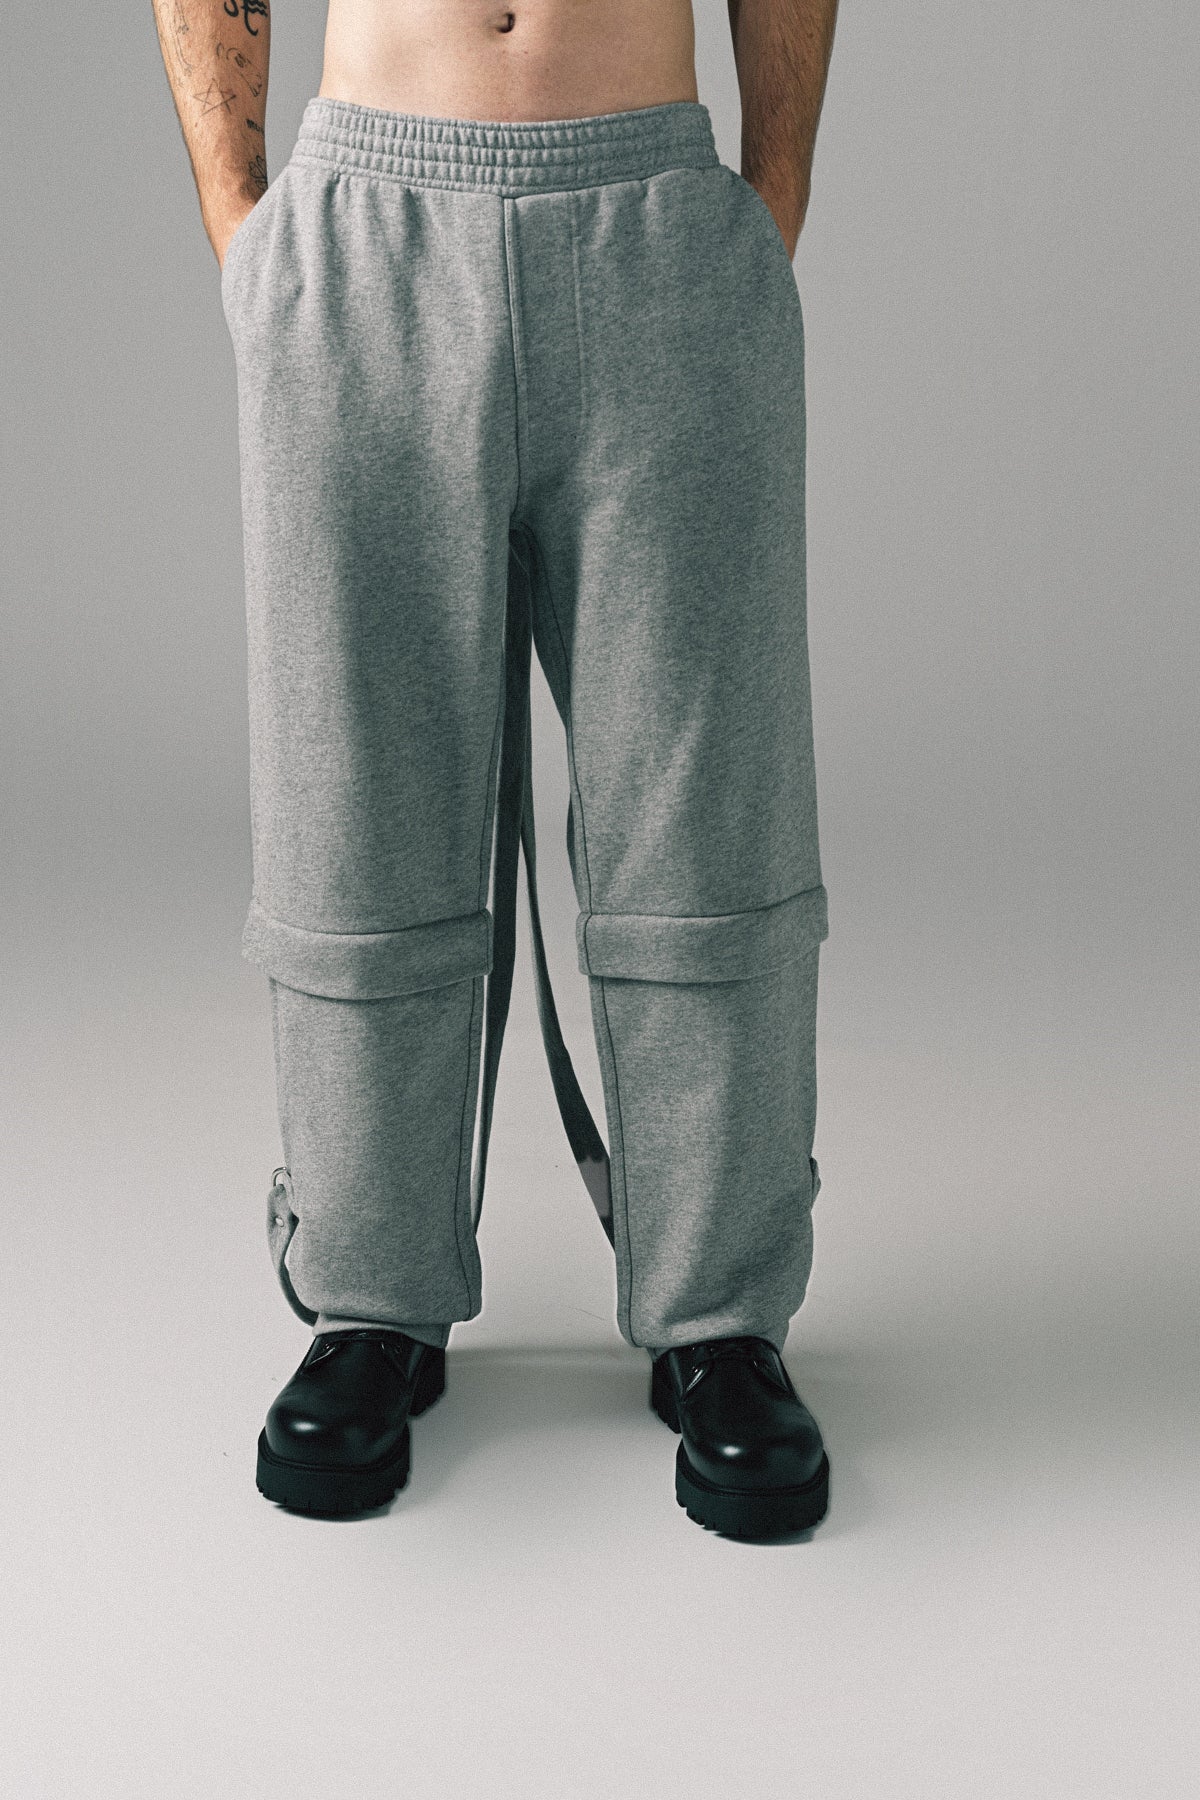 GIVENCHY | DETACHABLE JERSEY PANTS